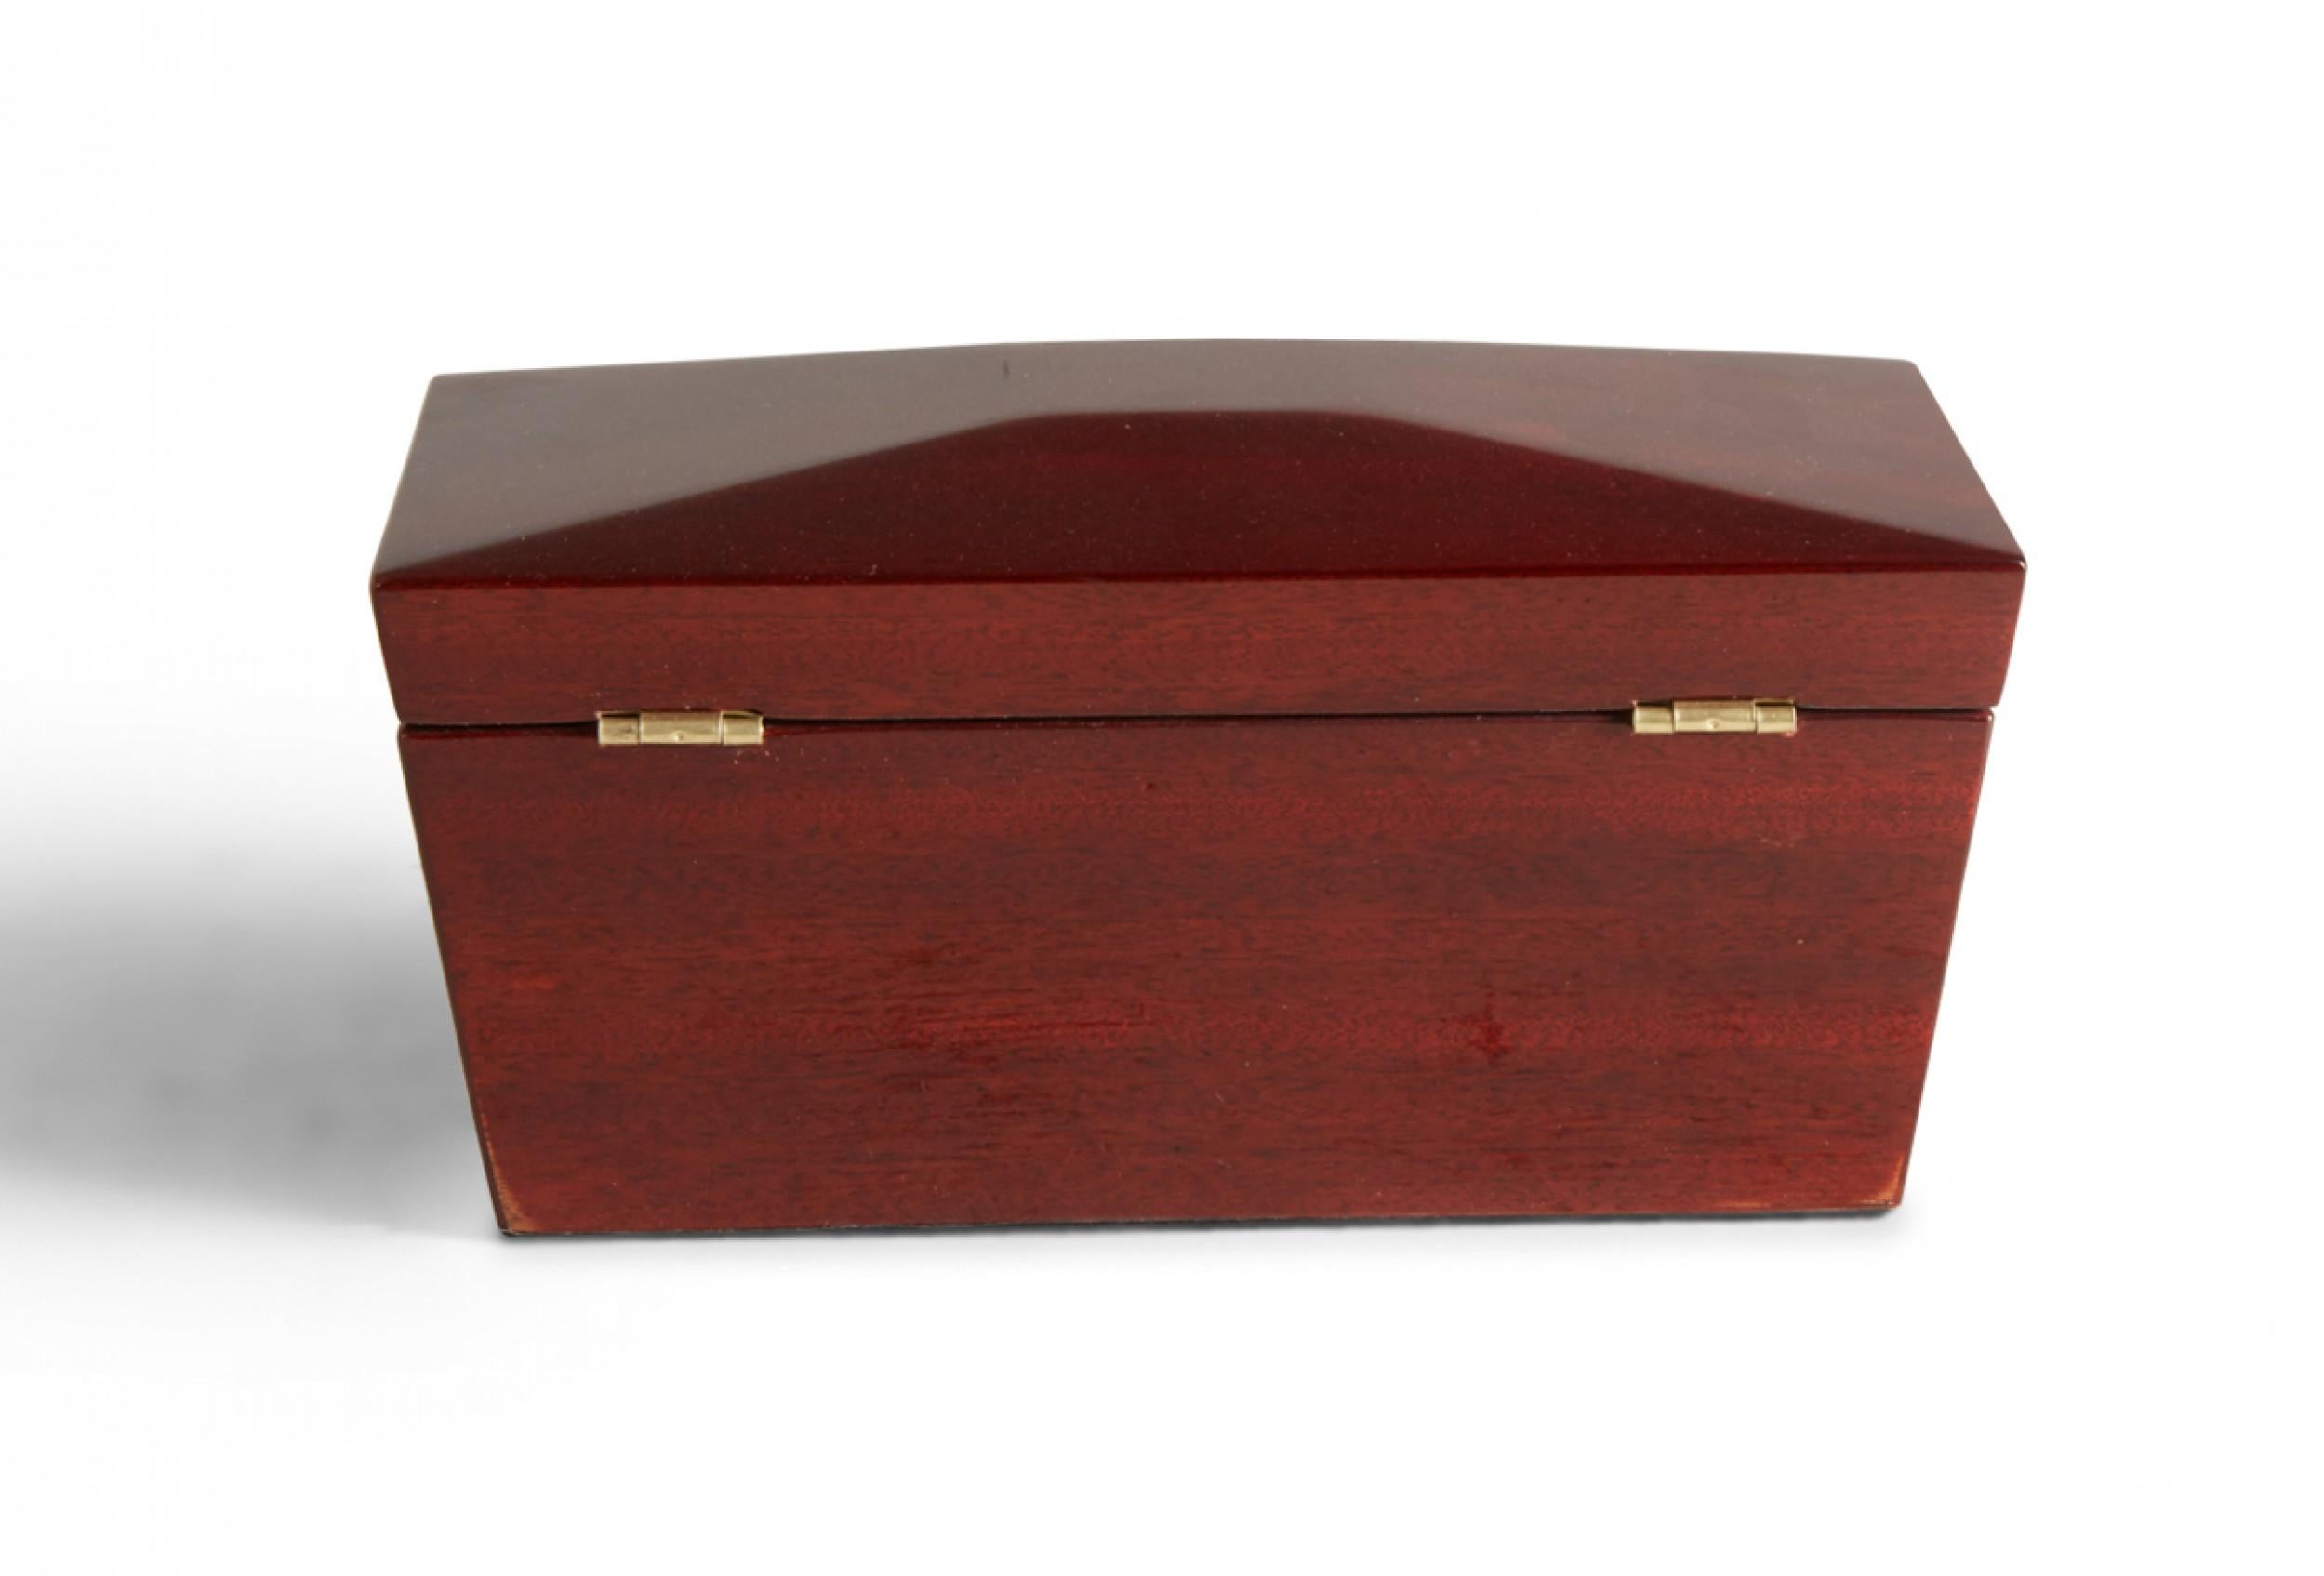 Contemporary Lacquered Cherry Wood Rectangular Decorative Box In Good Condition For Sale In New York, NY